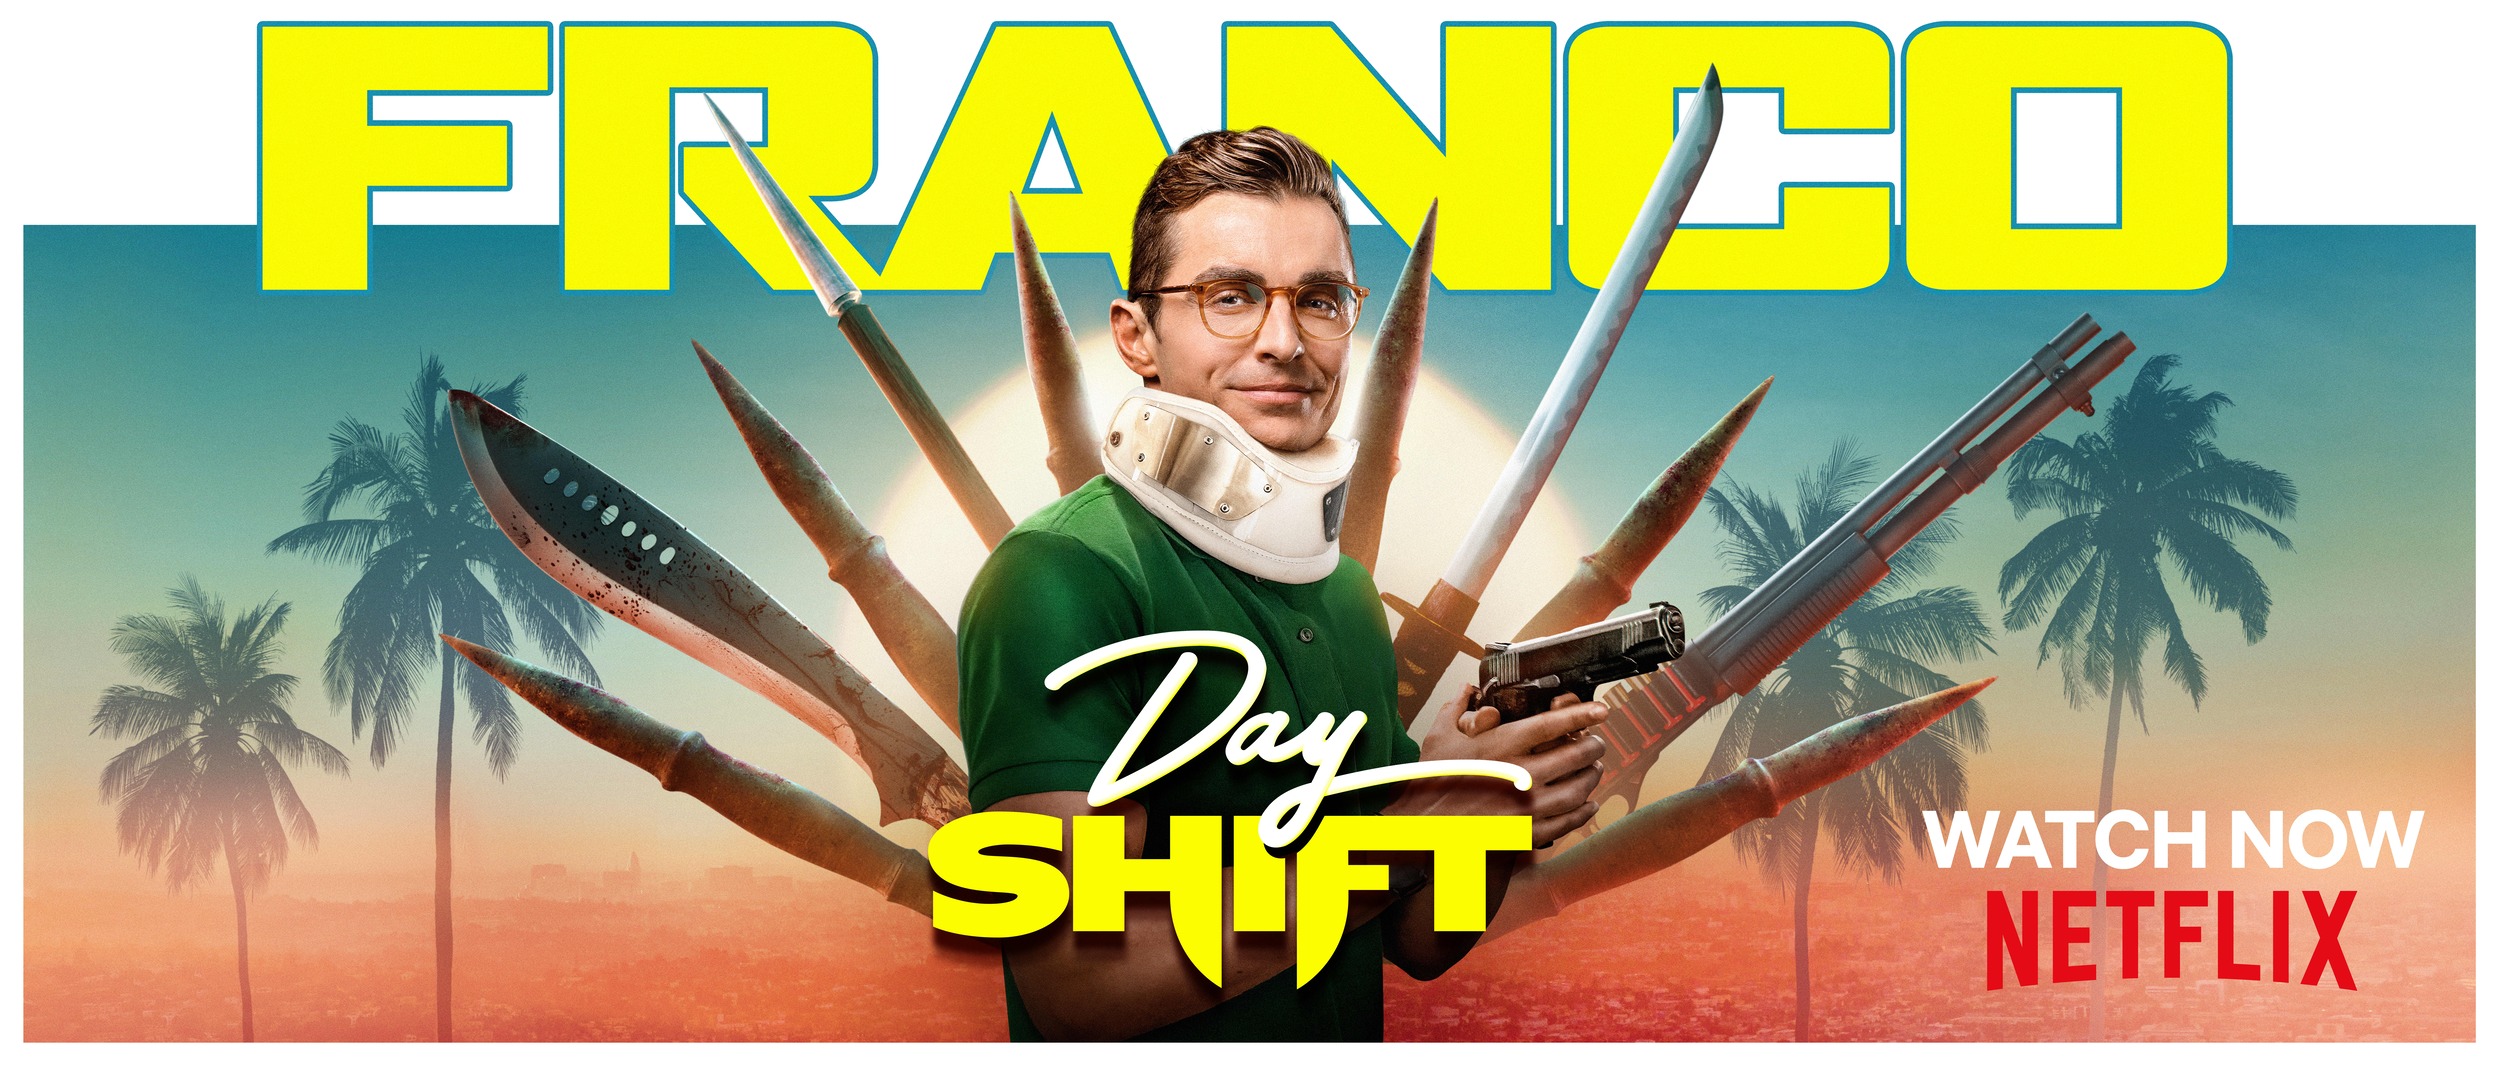 Mega Sized Movie Poster Image for Day Shift (#11 of 13)